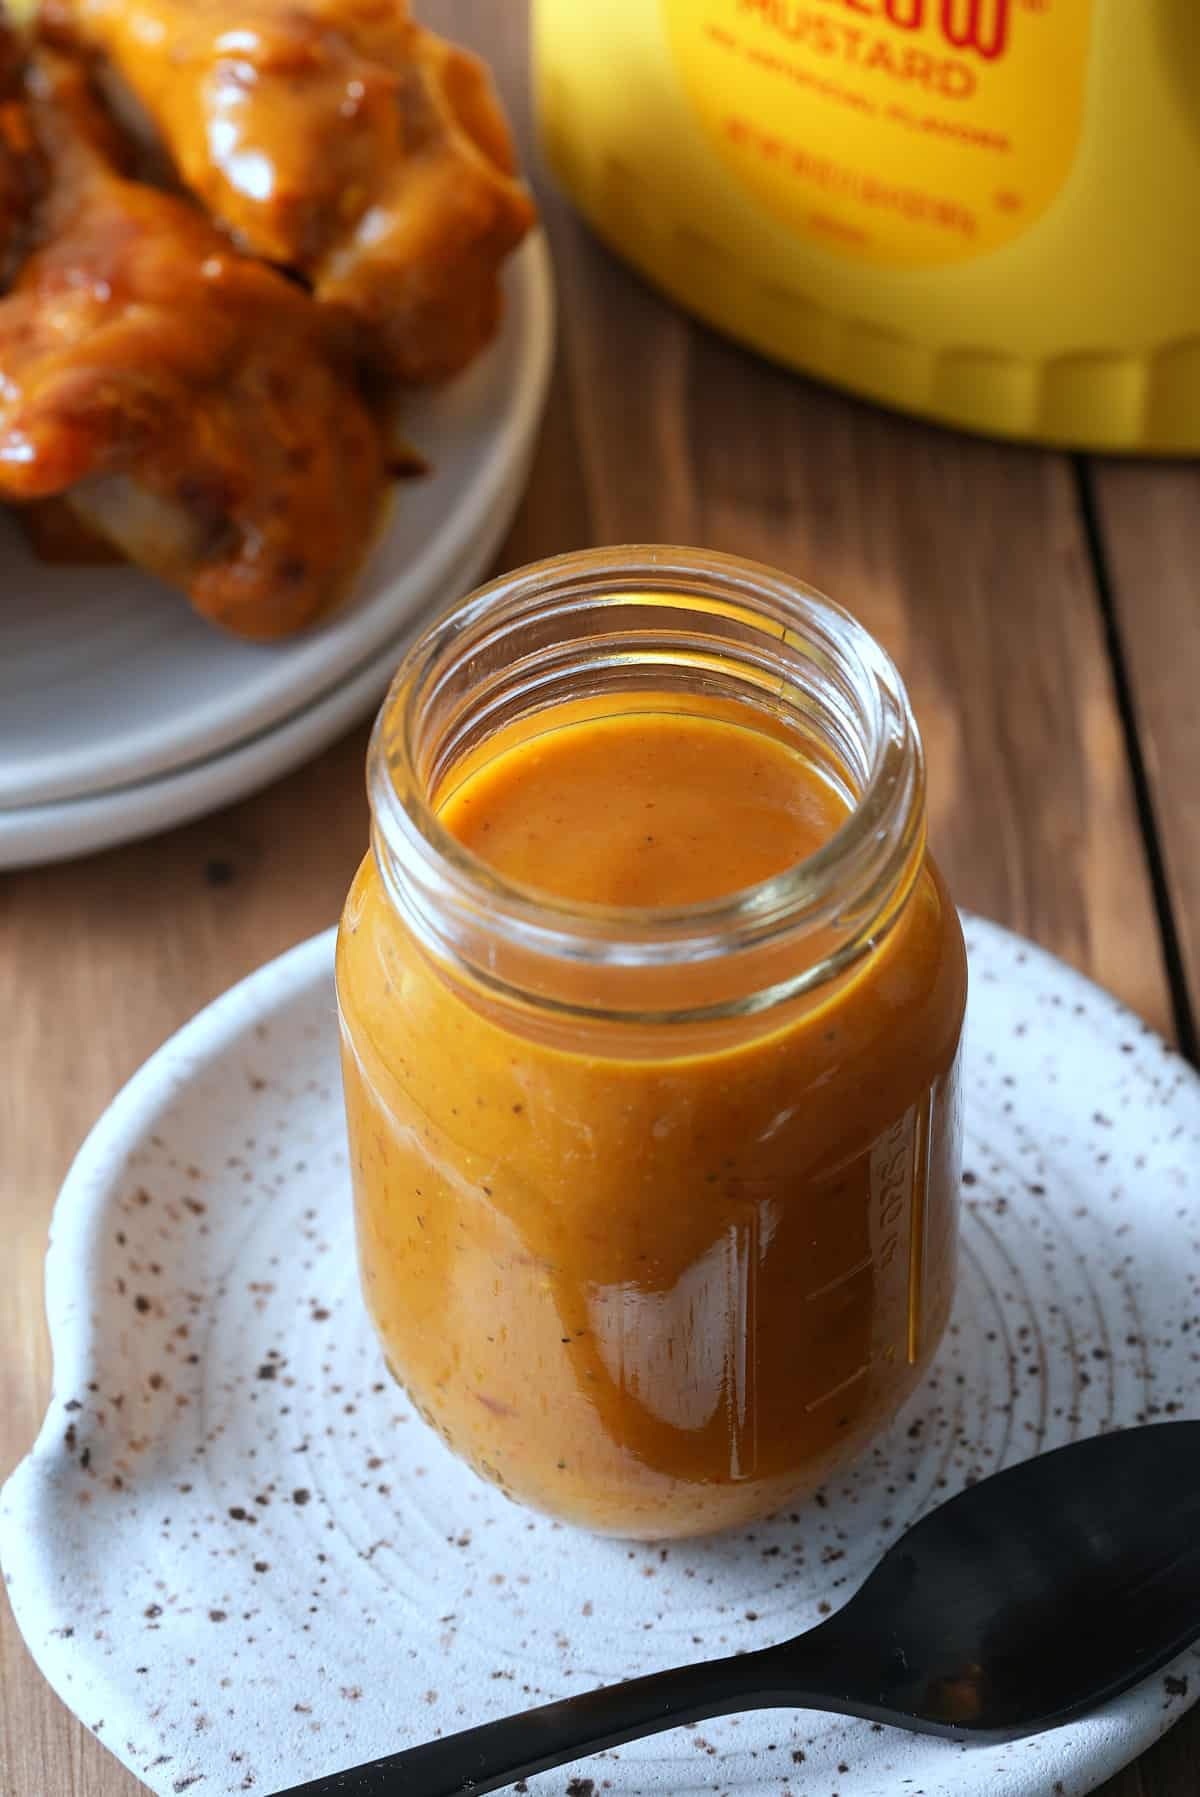 A glass jar filled with Carolina Gold BBQ sauce, with a dish of grilled chicken set alongside.